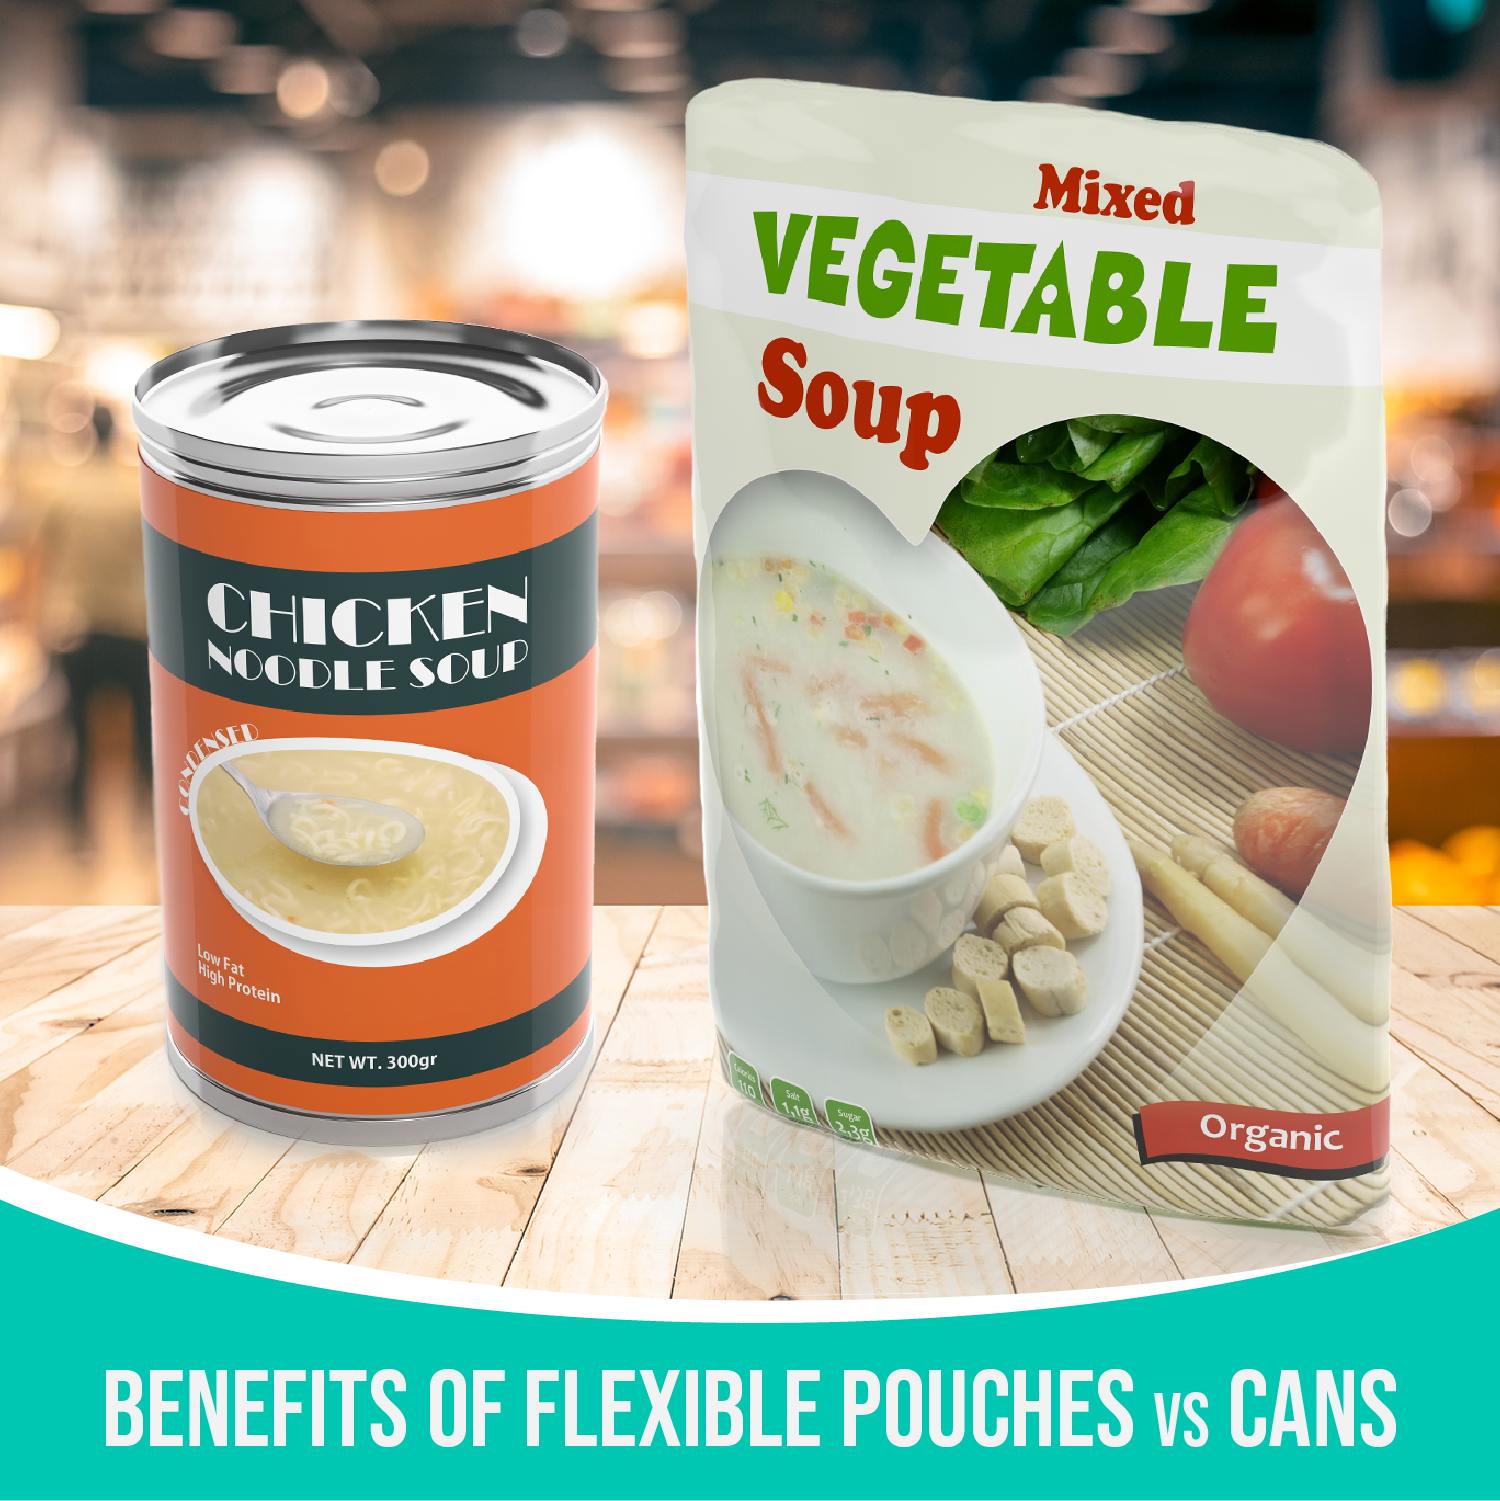 How Do Flexible Pouches Compare to Cans? The Advantages are Numerous!